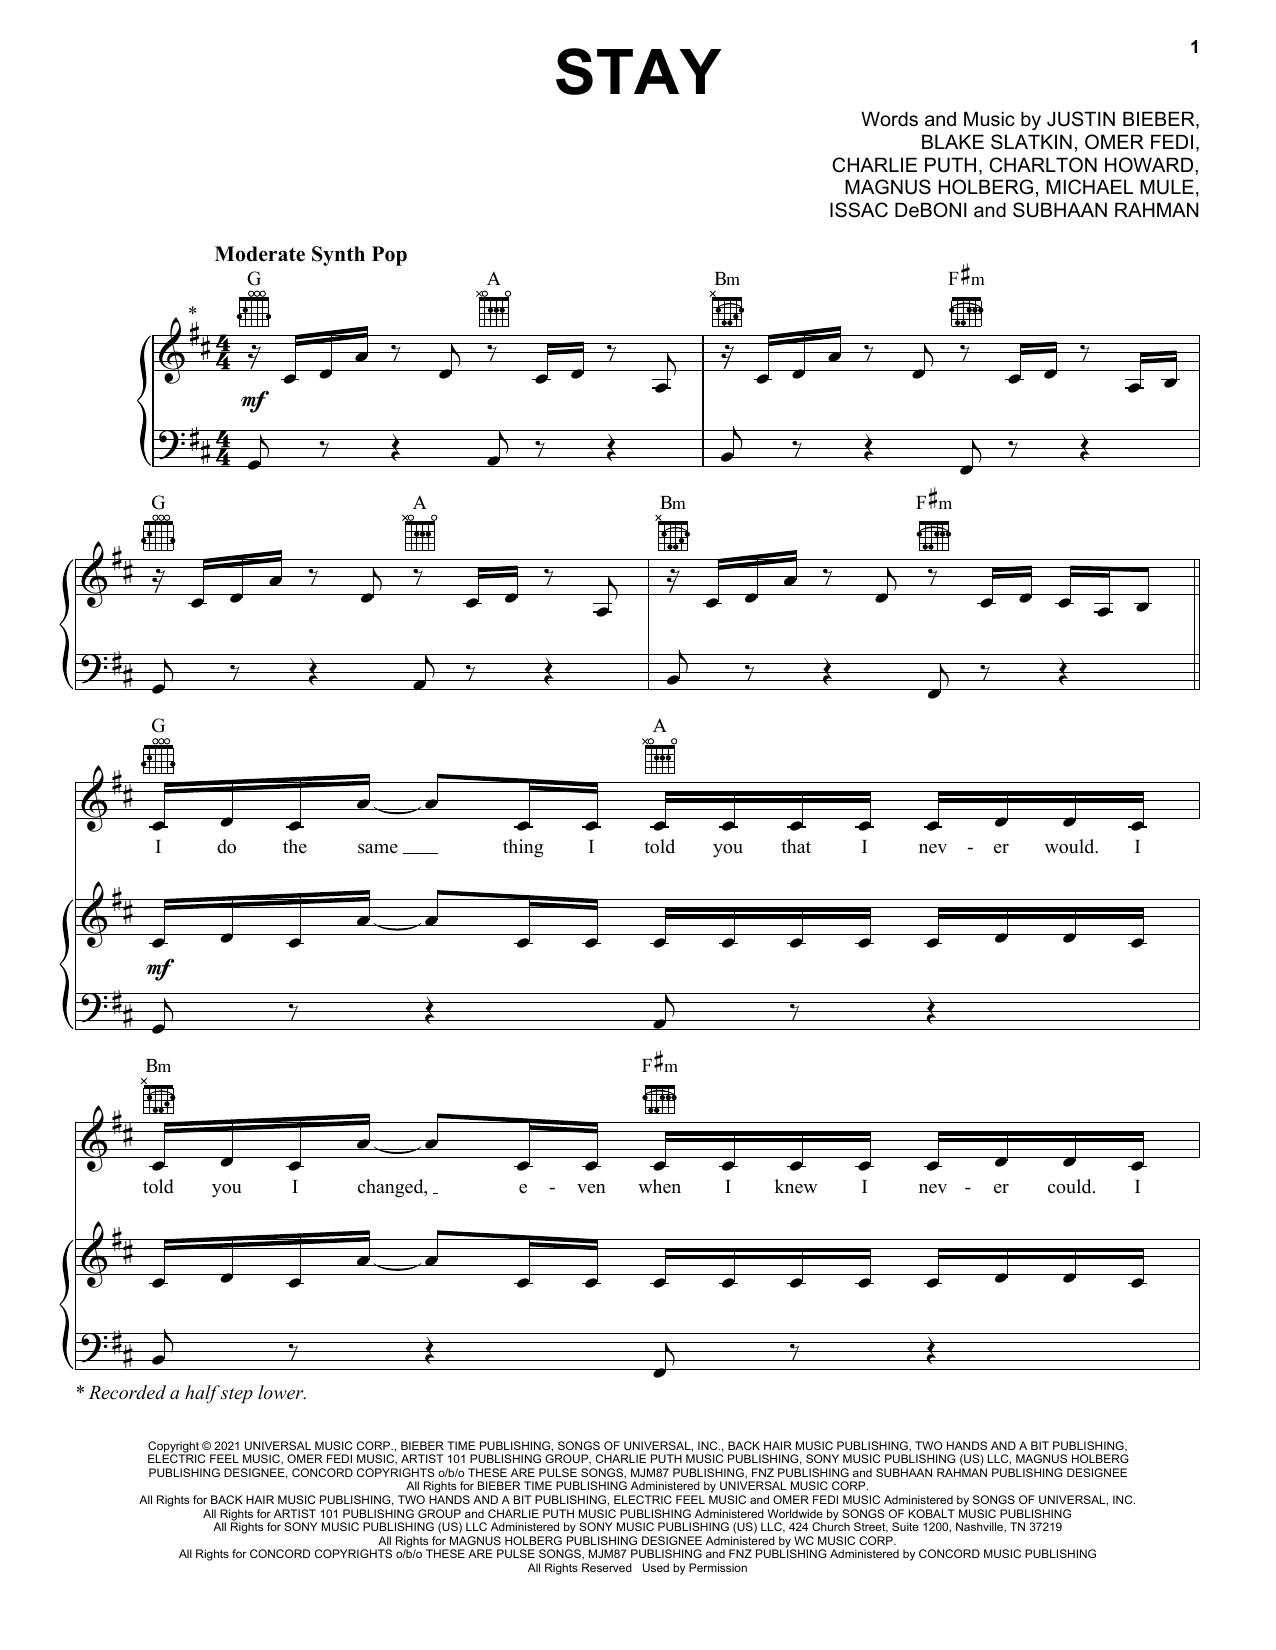 Download The Kid LAROI Stay (feat. Justin Bieber) Sheet Music